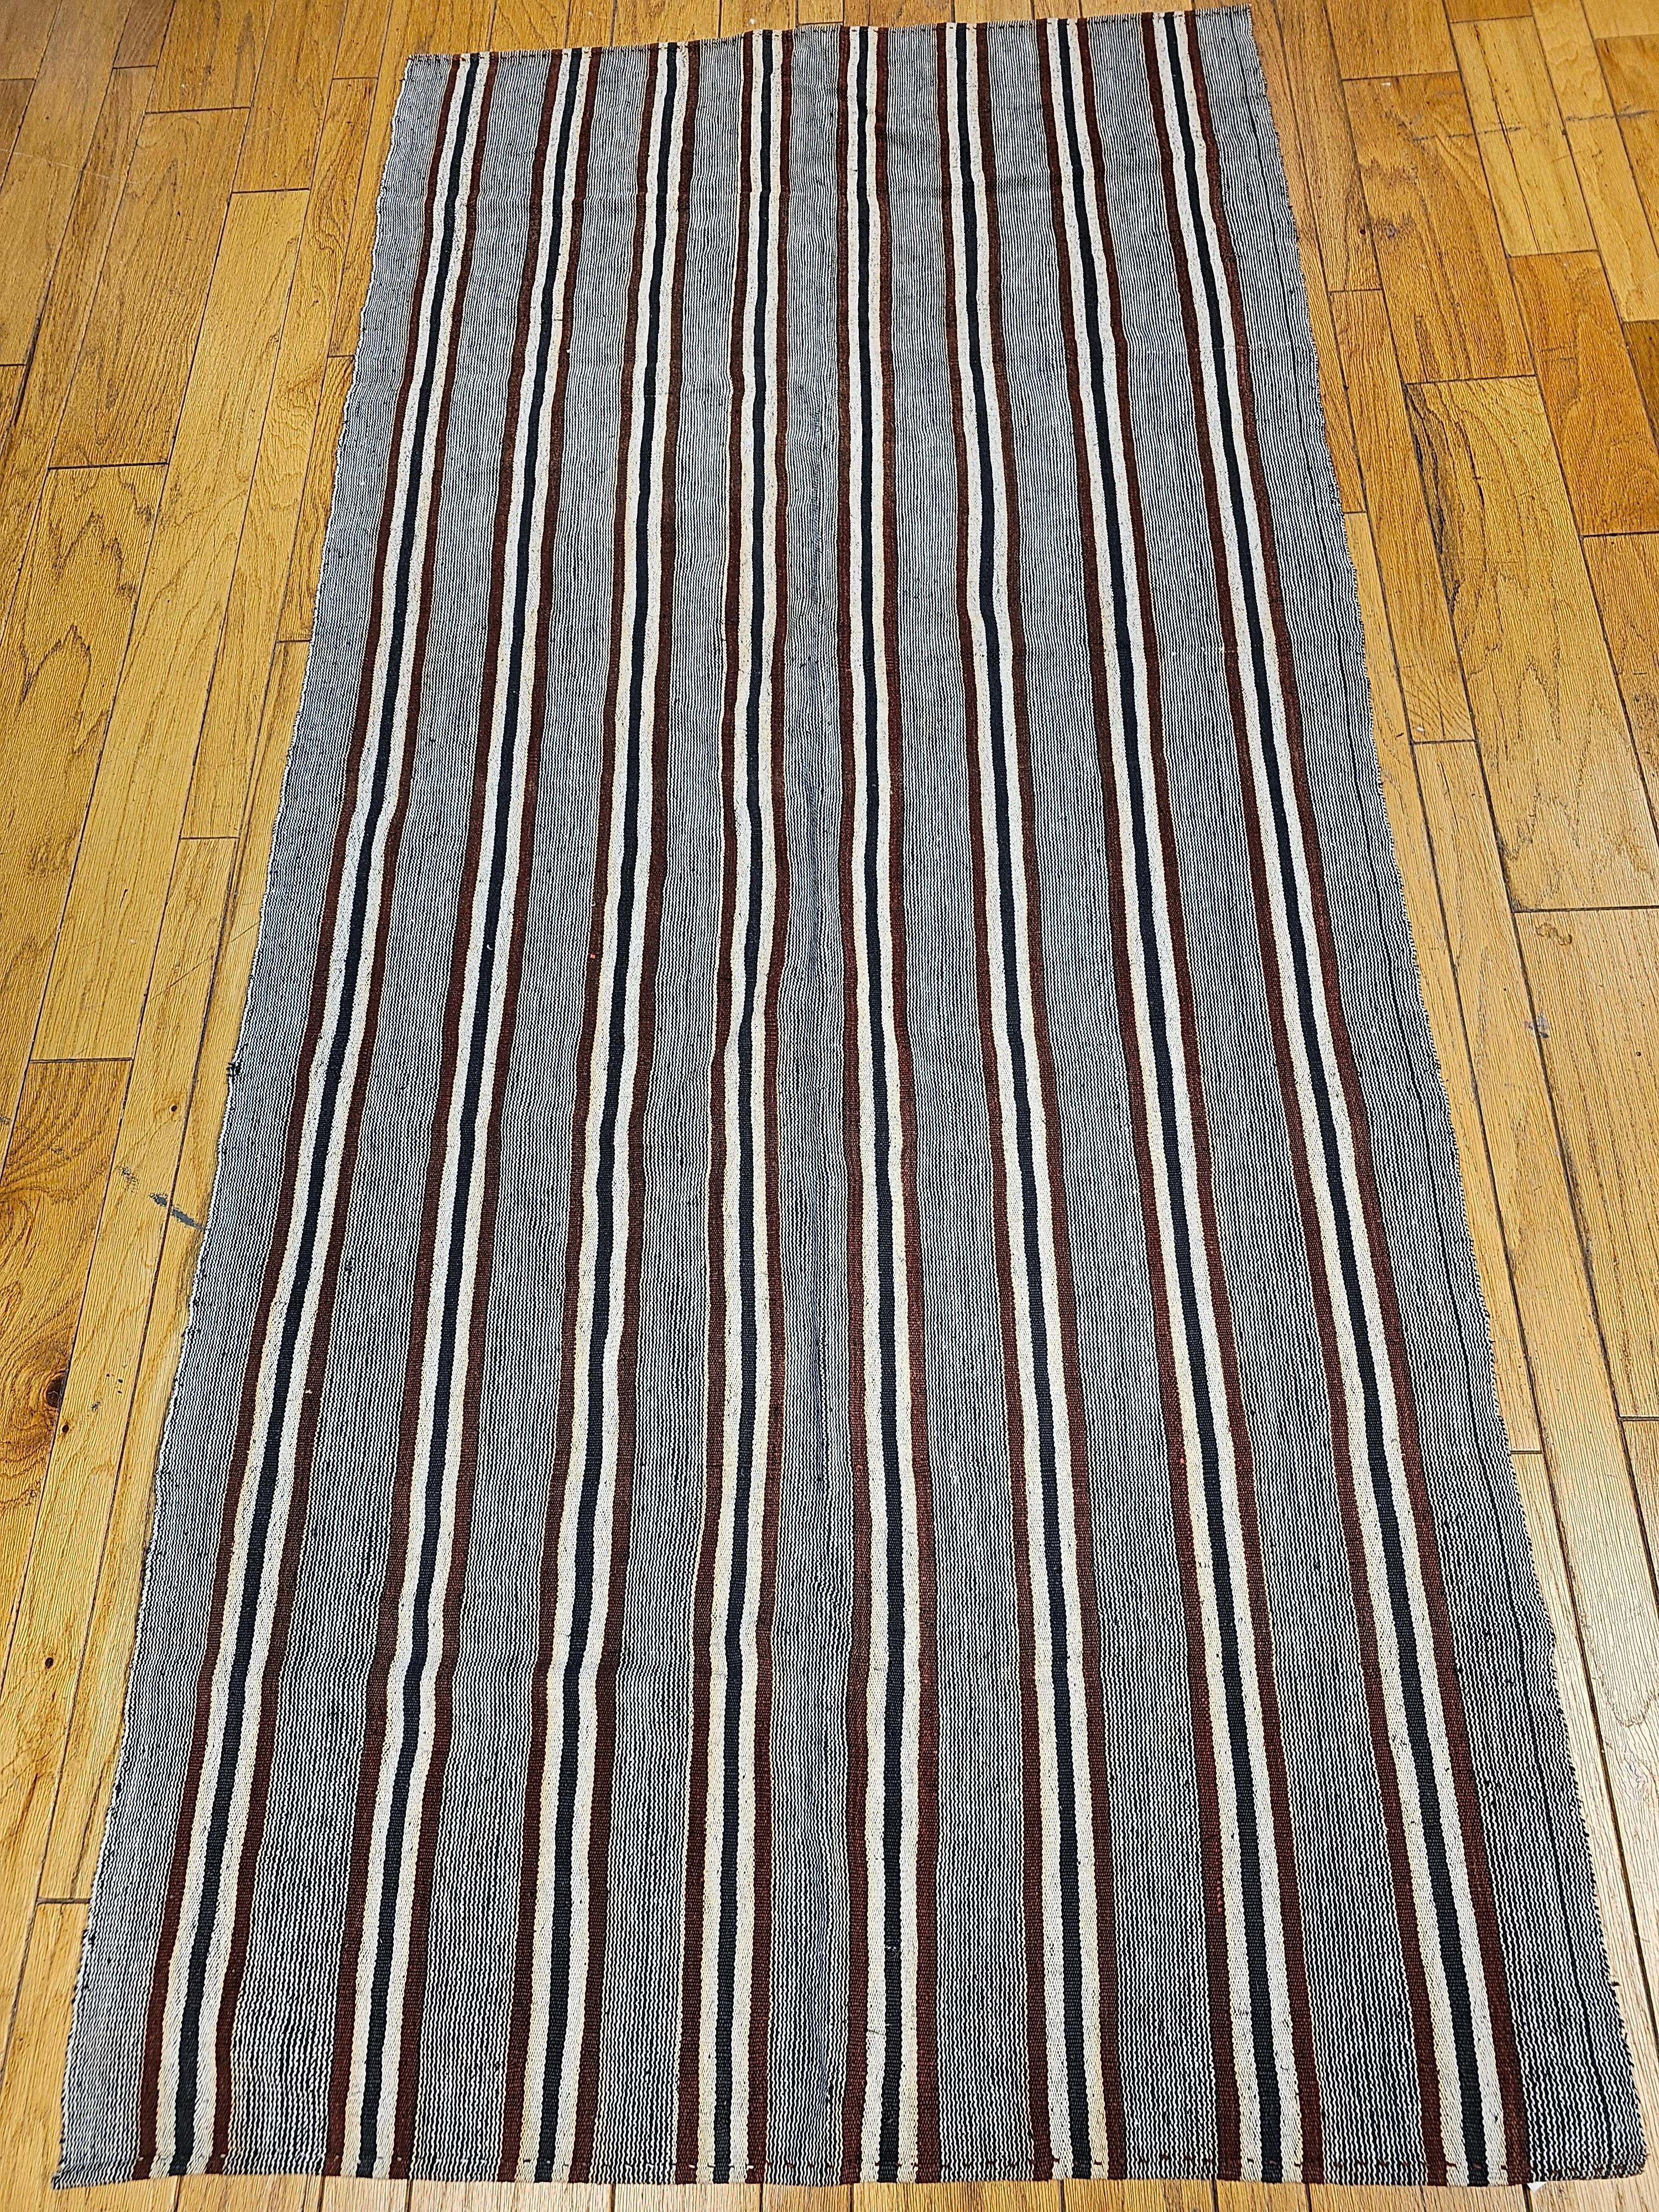  Modern style vintage Turkish Kilim flat-weave rug in earth tone colored stripes. This handwoven wool vintage Turkish Kilim has a gray background with vertical lines stripes in multiple colors including maroon, white, black dividing the field. The